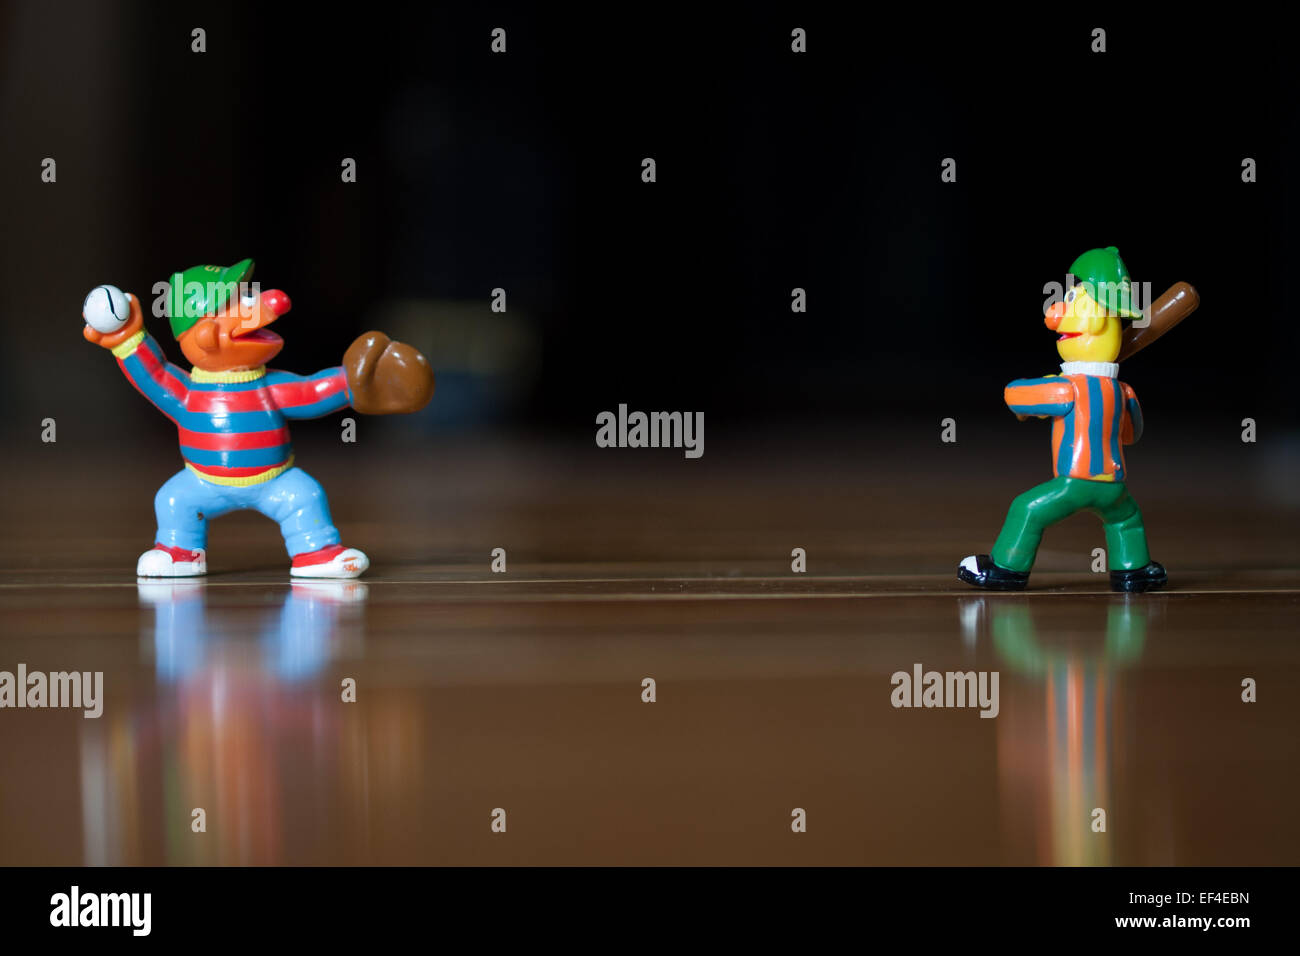 Figurines of Bert and Ernie (Muppets from the children's TV show, Sesame Street) playing baseball. Stock Photo